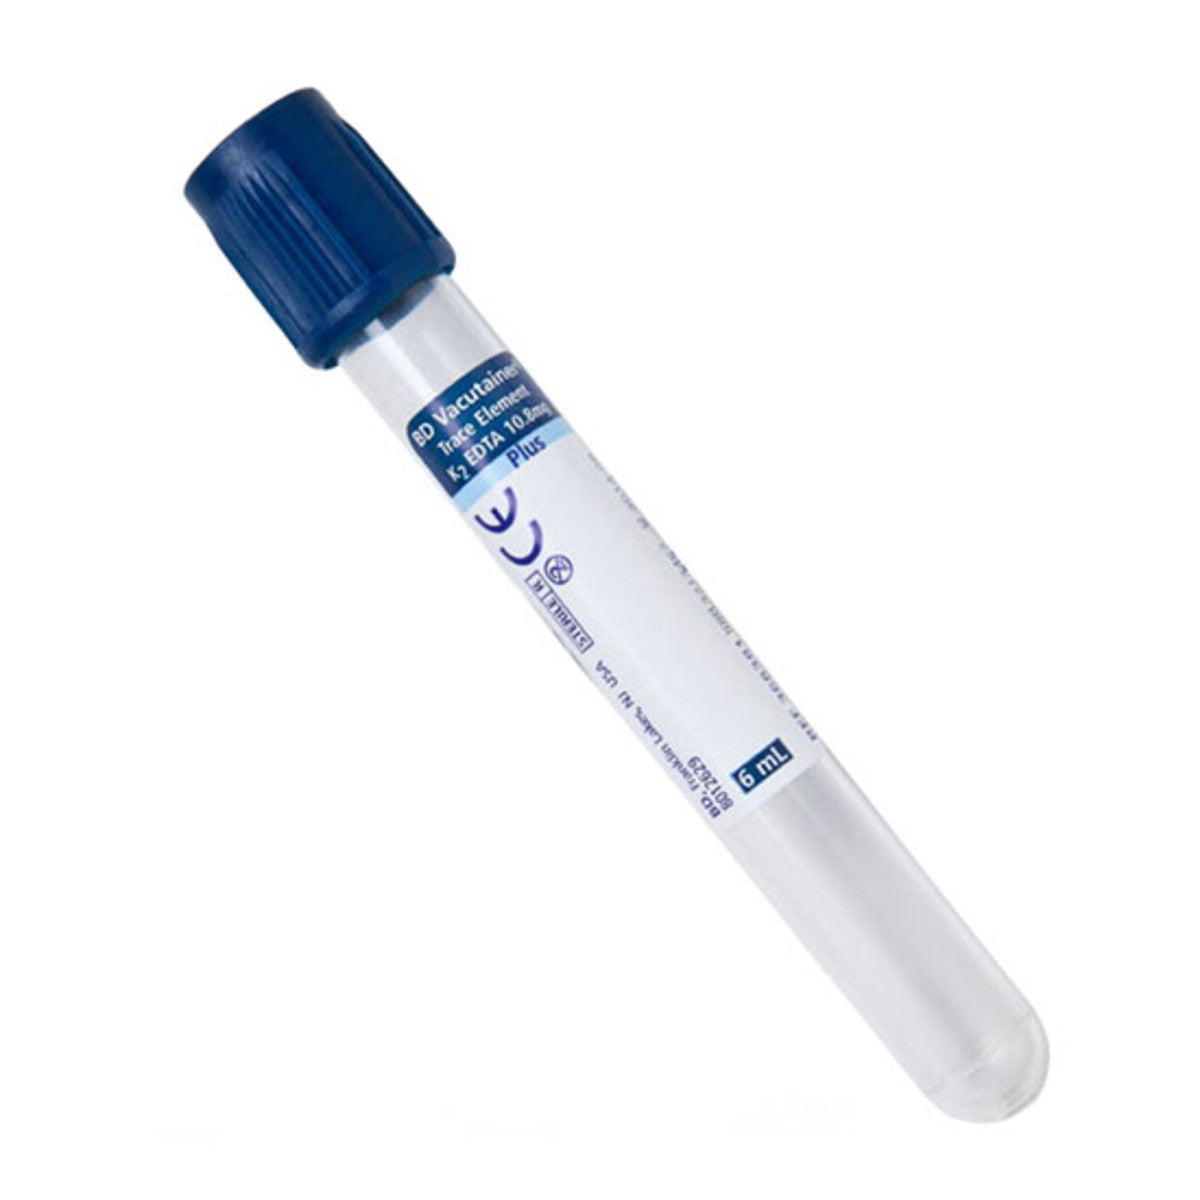 BD Vacutainer SPC Plus Plastic Tube Trace Element 6ml x Box of 100 - CLEARANCE due to short date